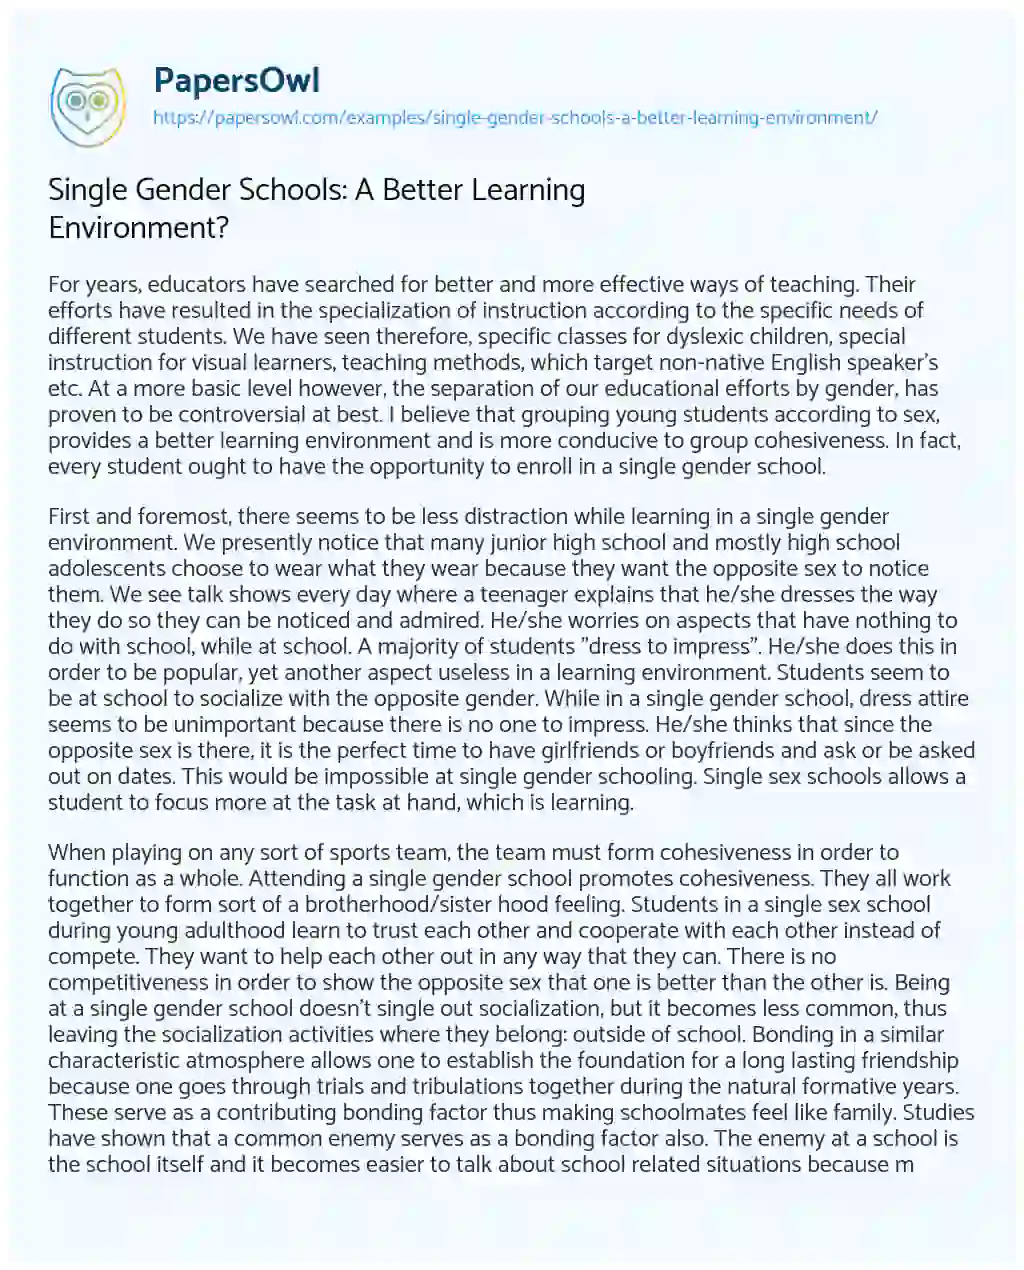 Essay on Single Gender Schools: a Better Learning Environment?